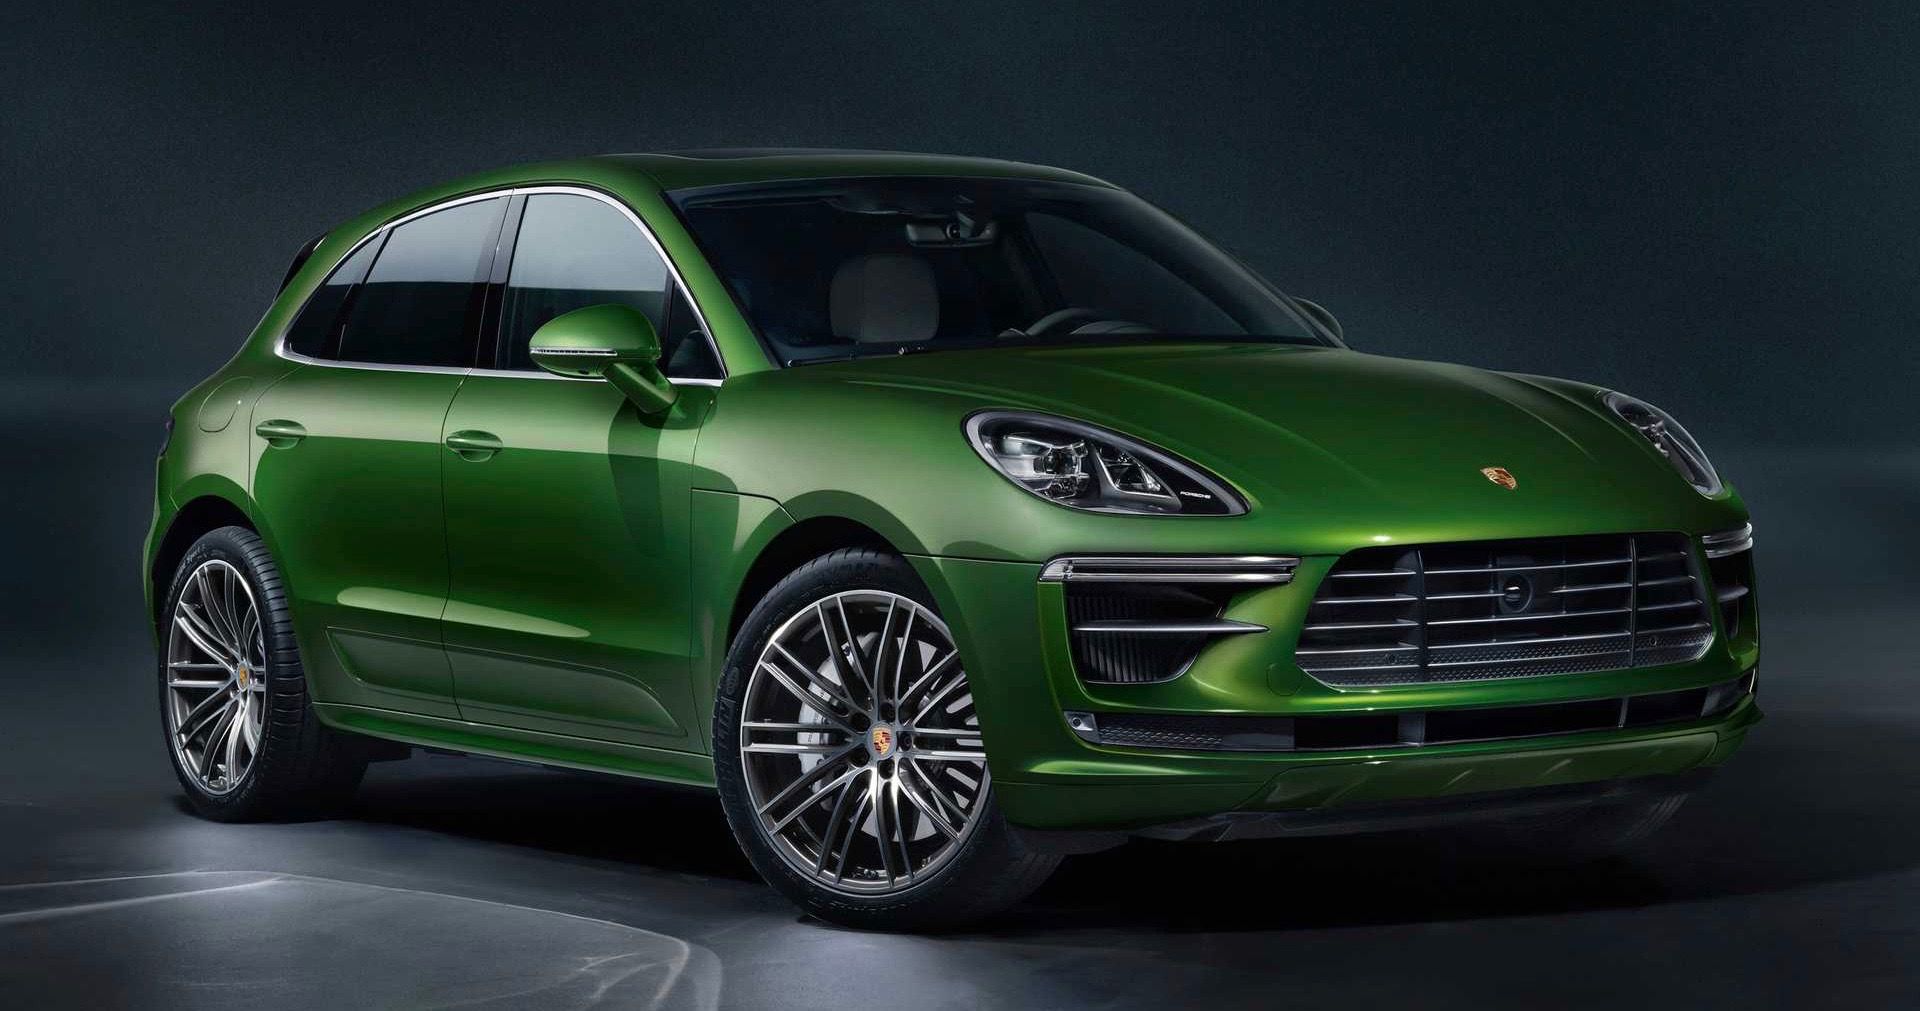 The 2020 Porsche Macan Turbo Compact SUV Reaches A Top Speed Of 167MPH